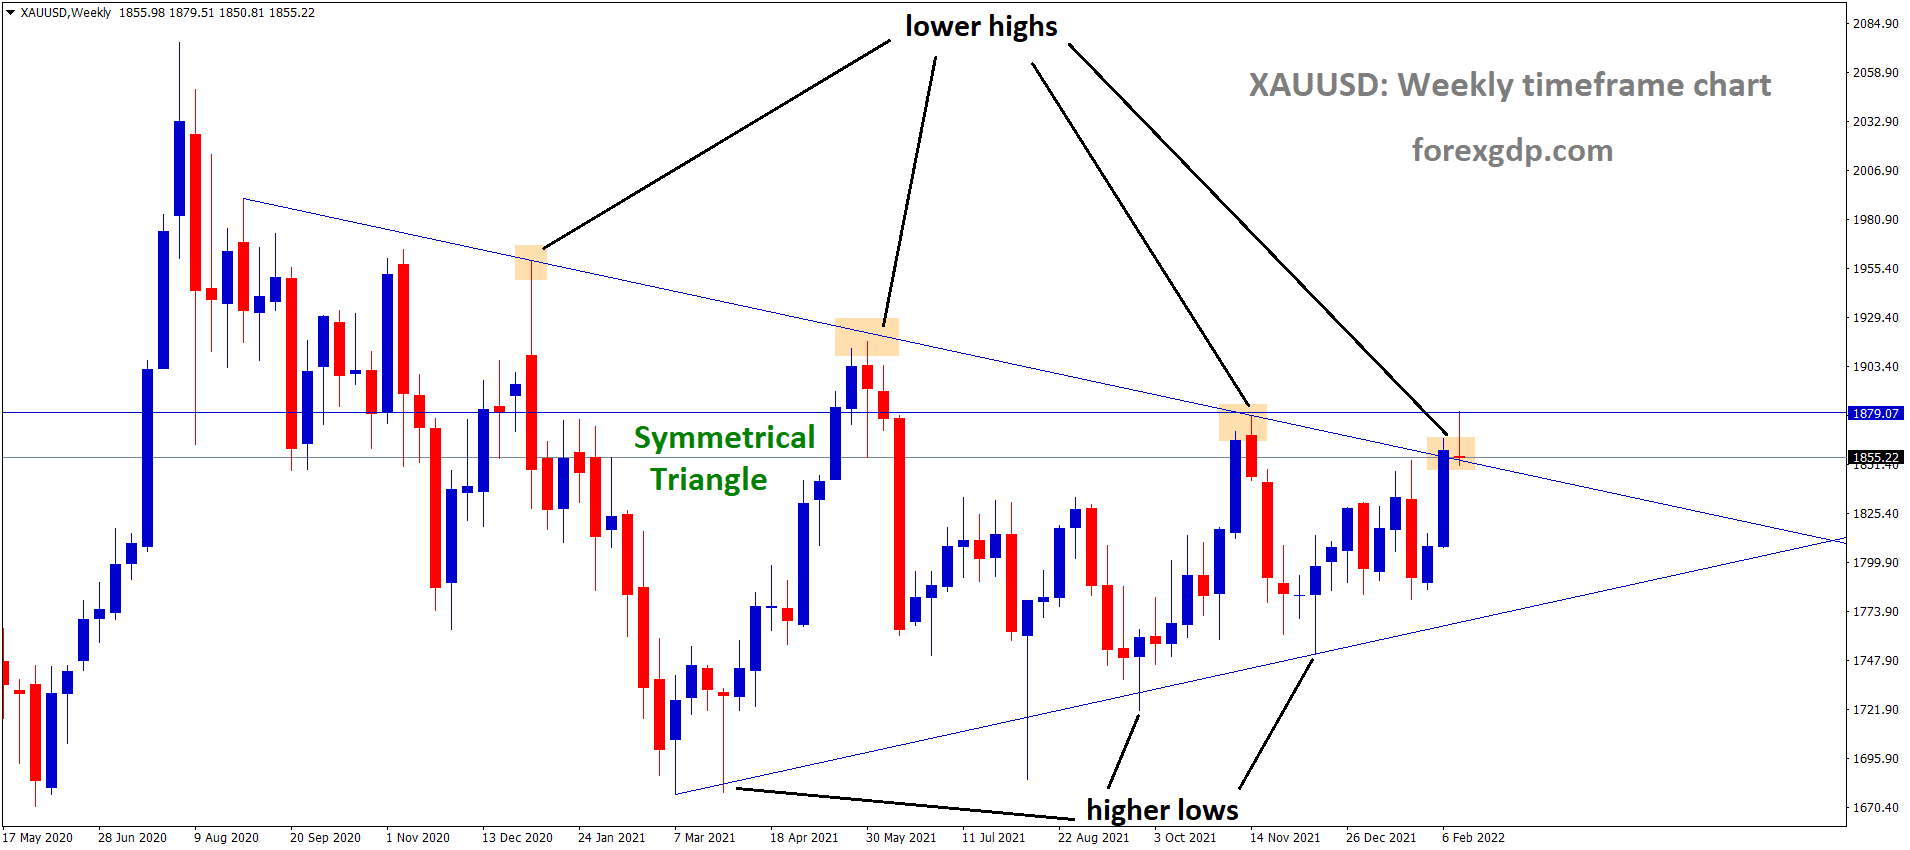 XAUUSD Gold price is moving in the Symmetrical triangle pattern and the market has fallen from the top area of the pattern.